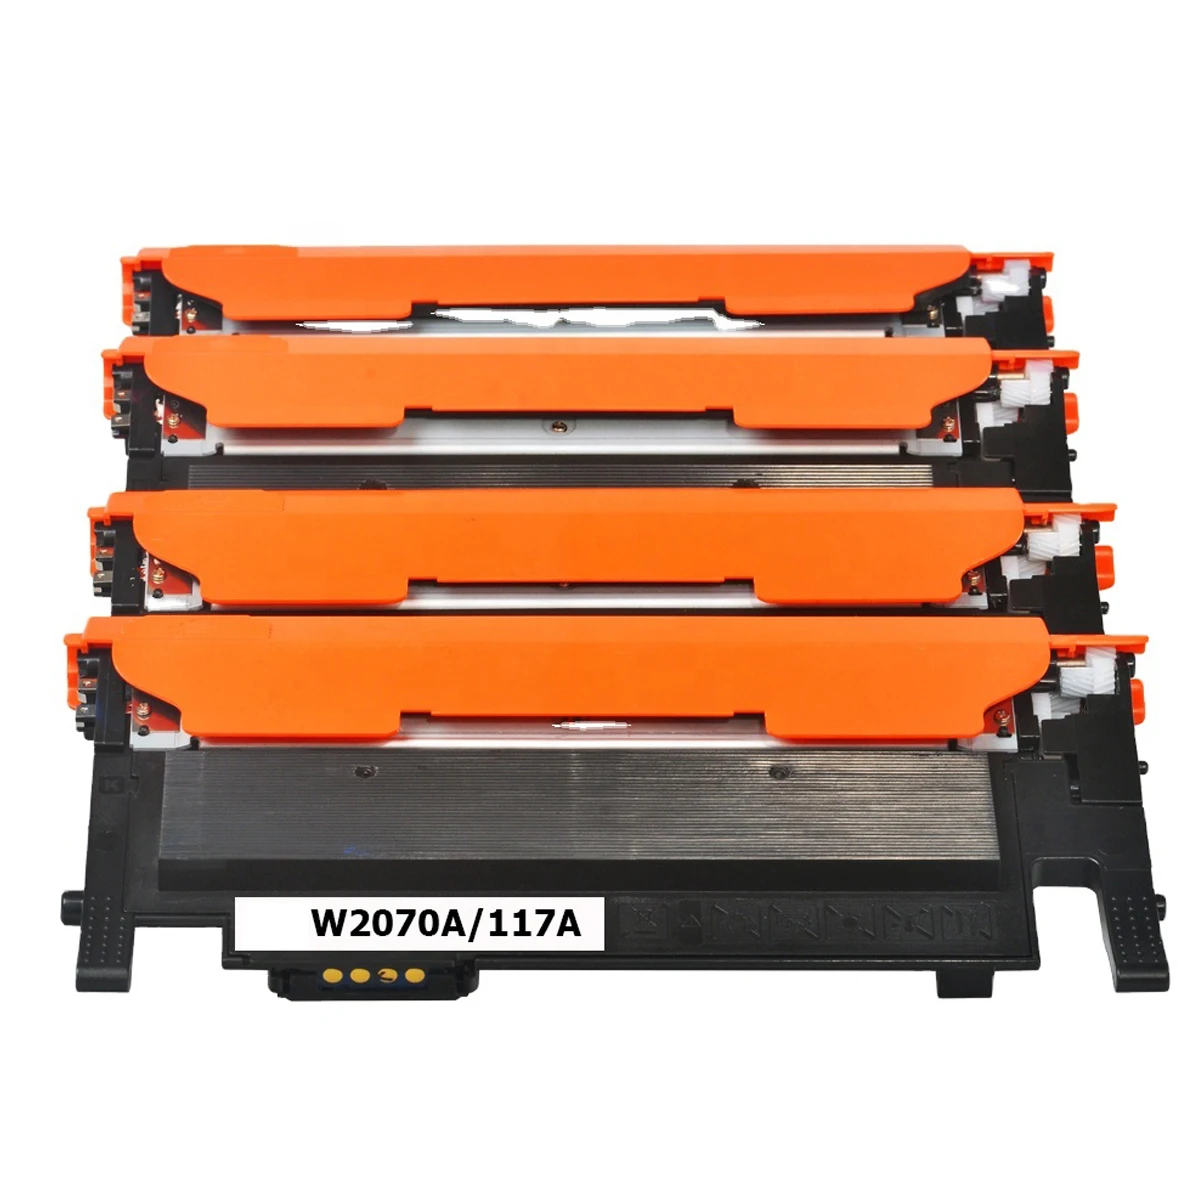 

Toner Cartridge for HP Color LaserJet/Laser Jet MFP 150 178 179 150a 150nw 178nw 178nwg 179fnw 179fwg W2070A W2071A W2072A 117A